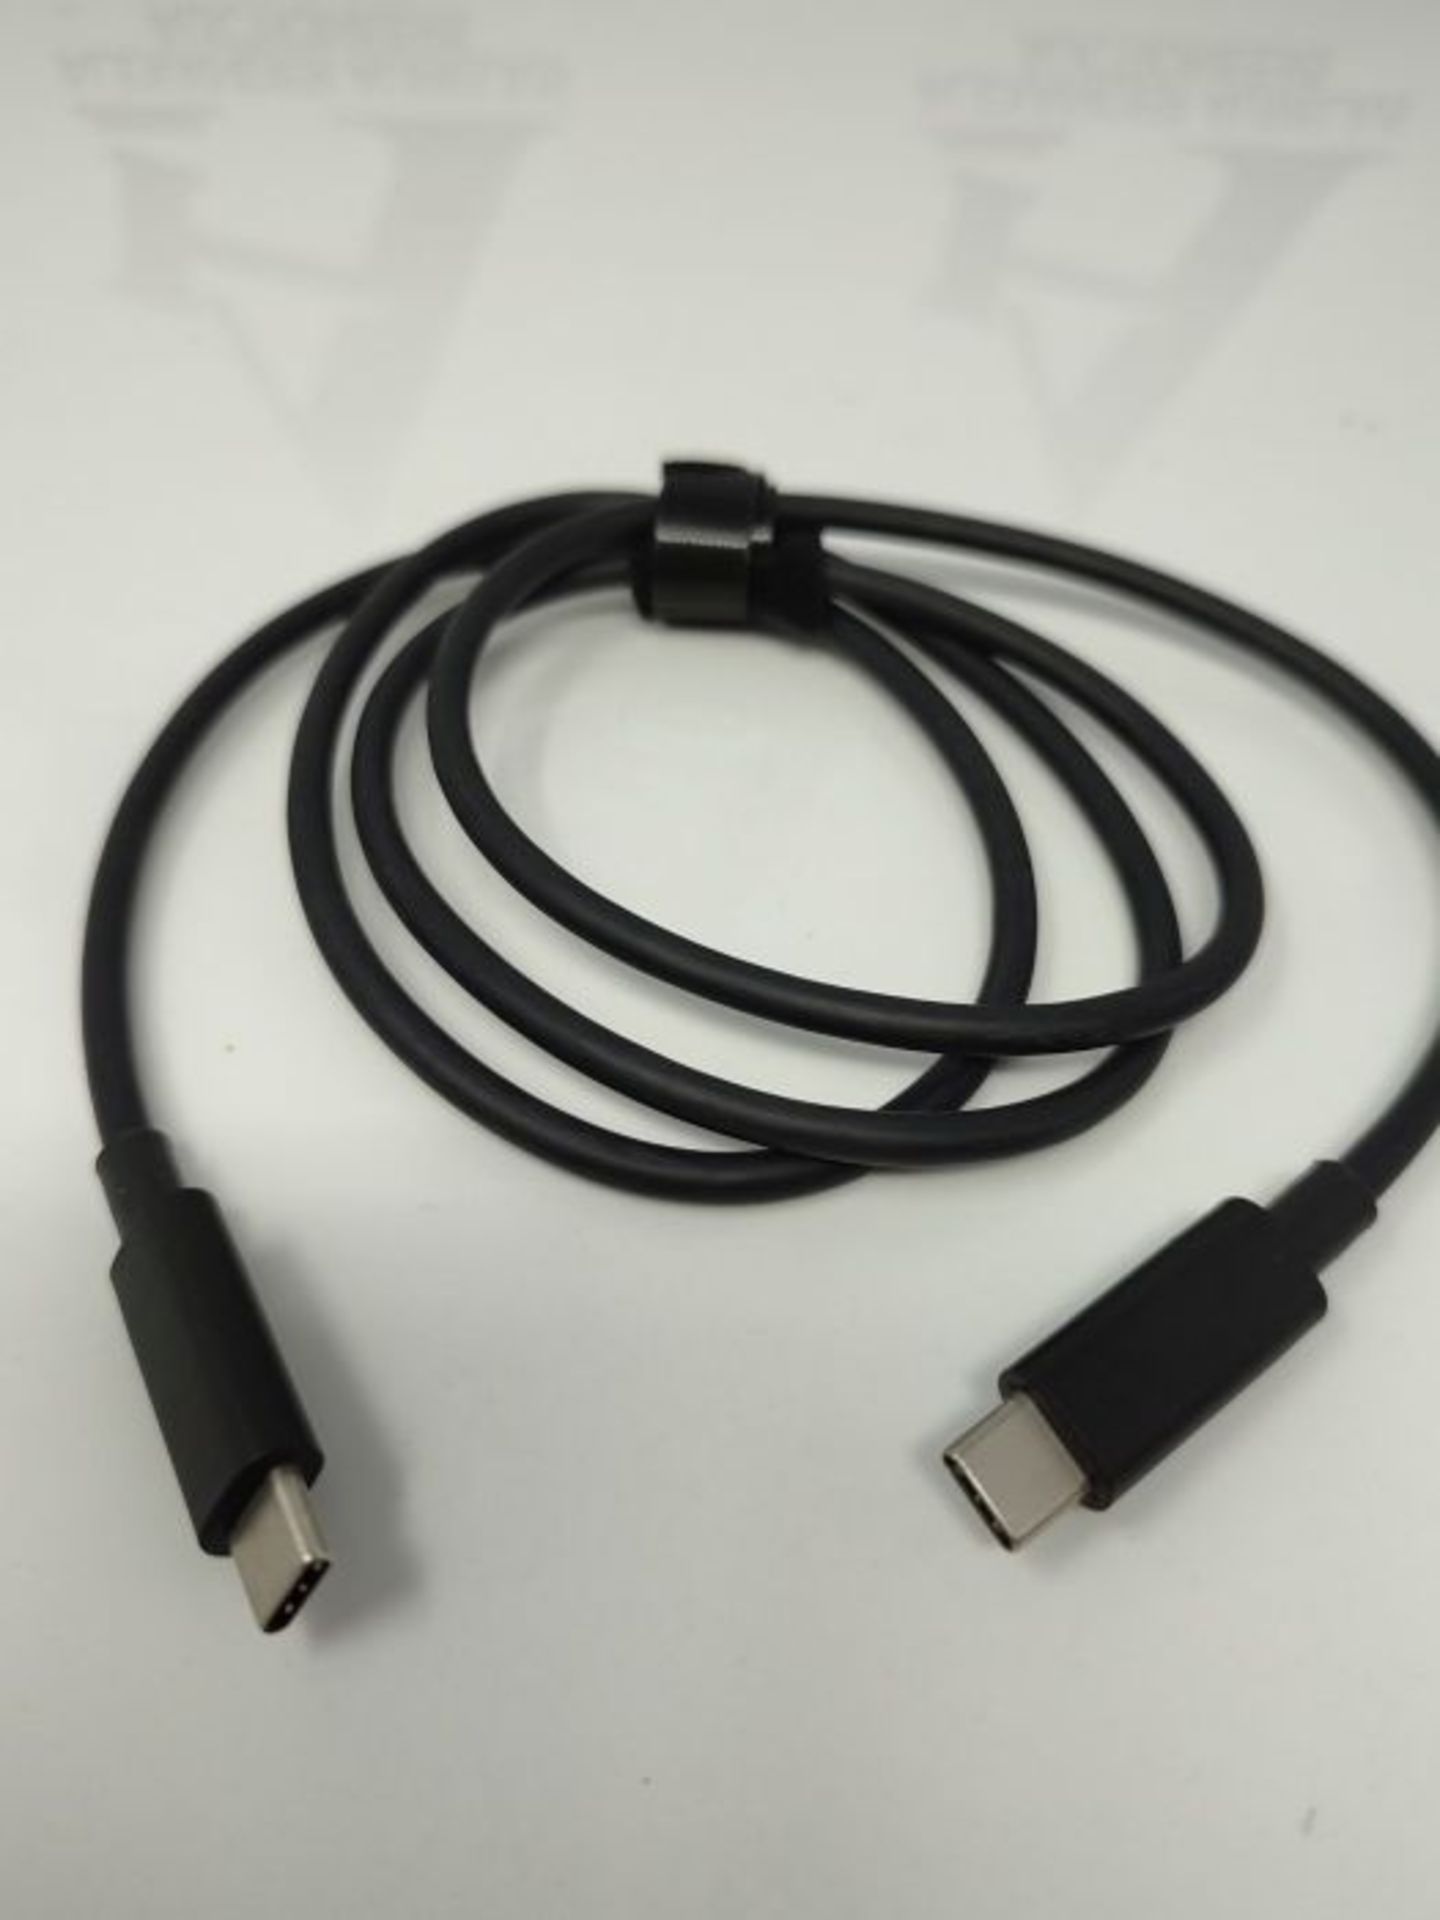 HUION Full-Featured USB-C to USB-C Cable, USB 3.1 GEN 2, Suitable for Kamvas 13, Kamva - Image 2 of 2